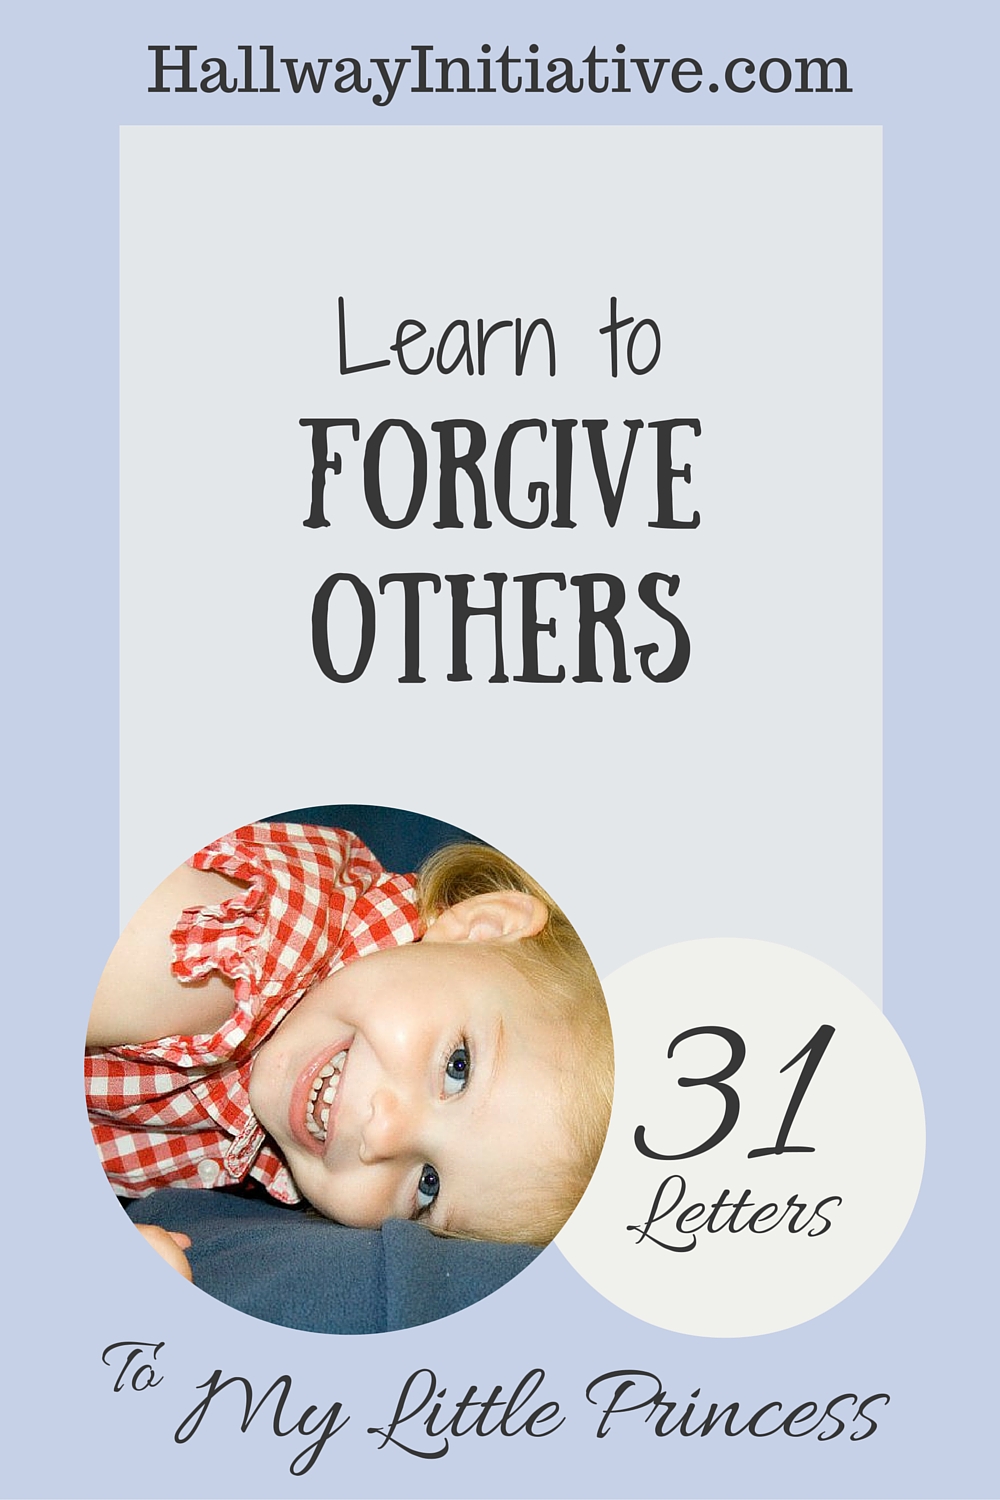 Learn to forgive others